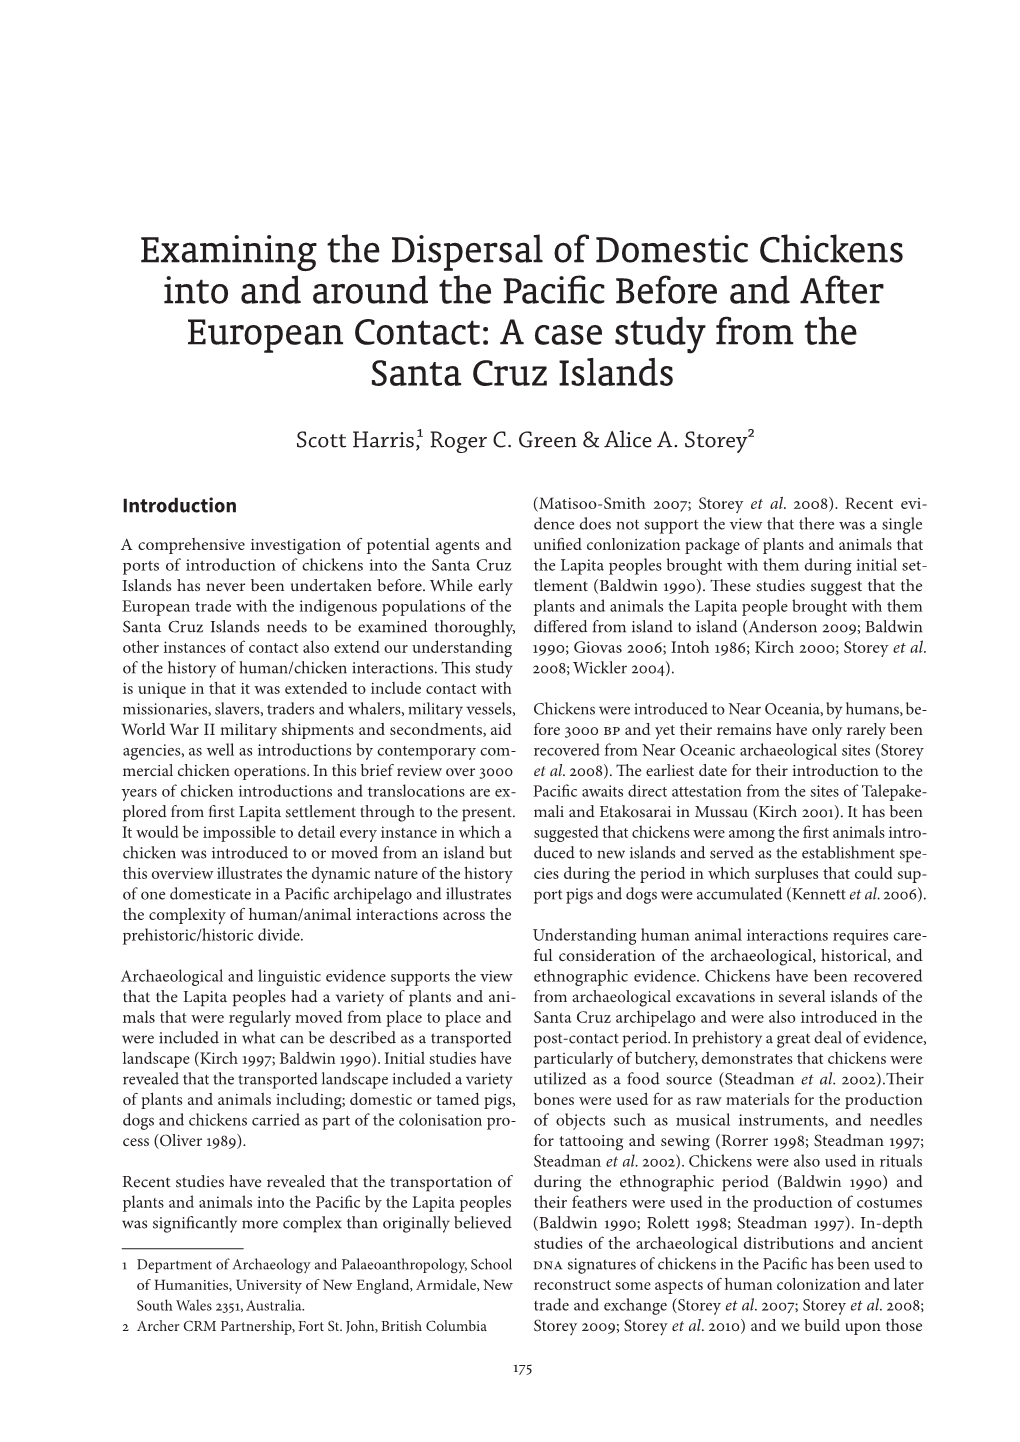 Examining the Dispersal of Domestic Chickens Into and Around the Pacific Before and After European Contact: a Case Study from the Santa Cruz Islands